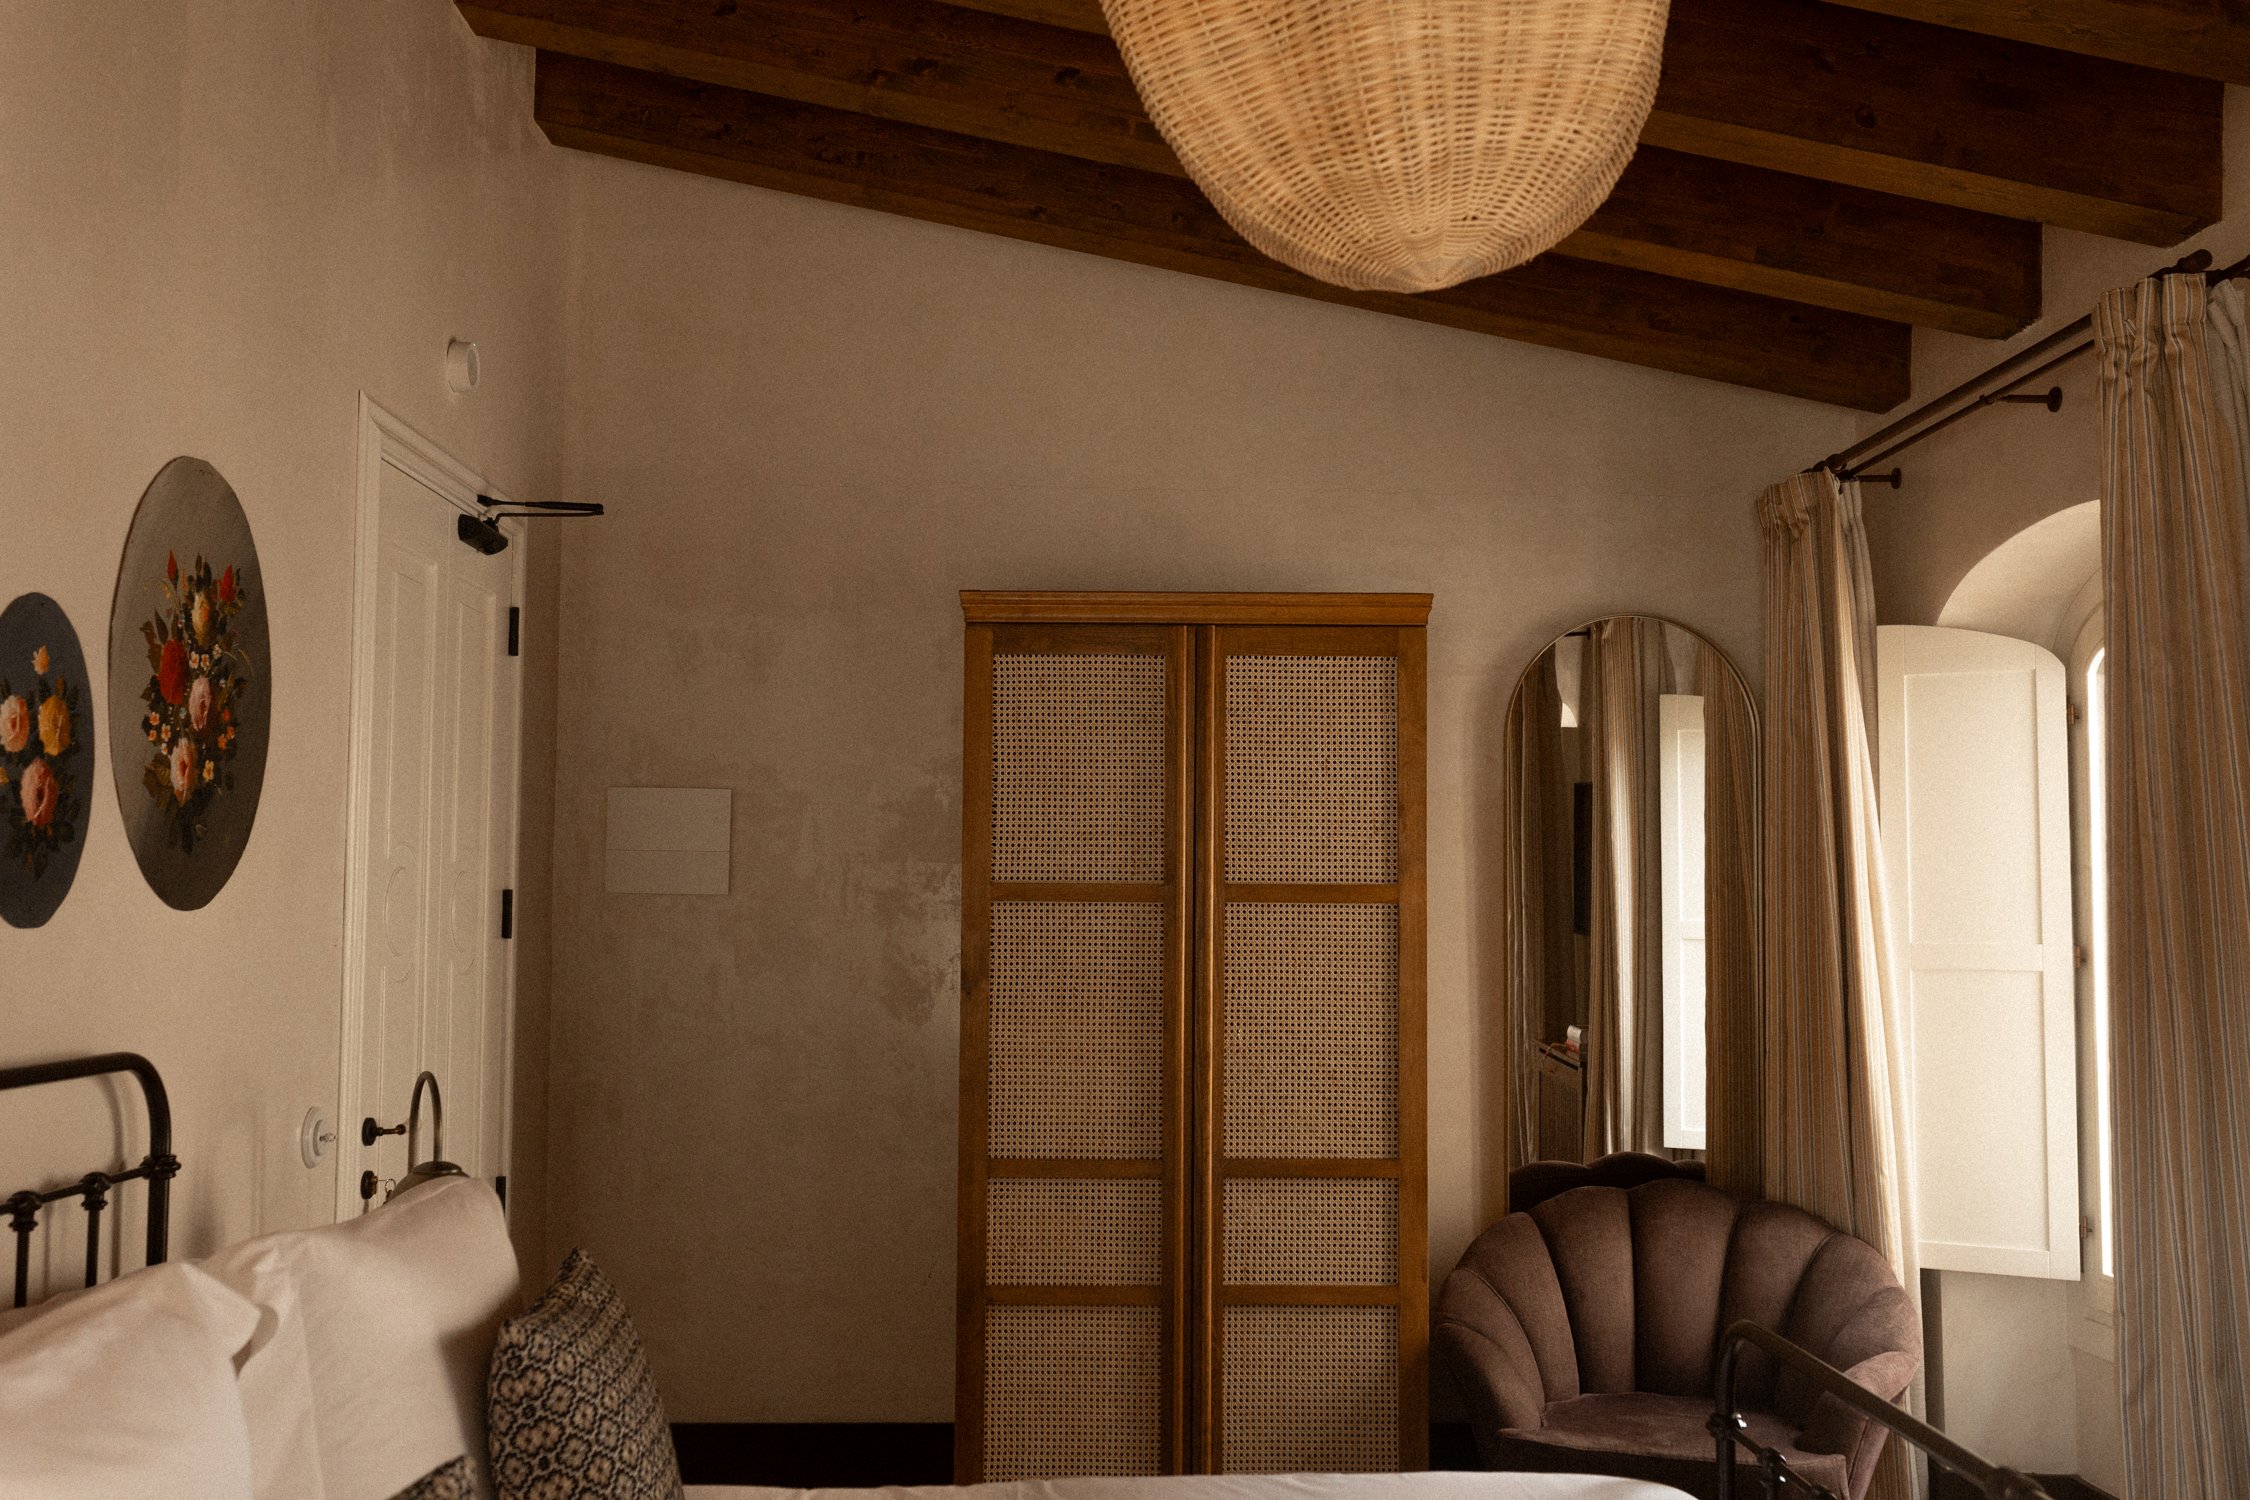 La Bionda_ A Boutique Hotel in Begur, a 17th-Century Gem of Sustainability and Style-176.jpg